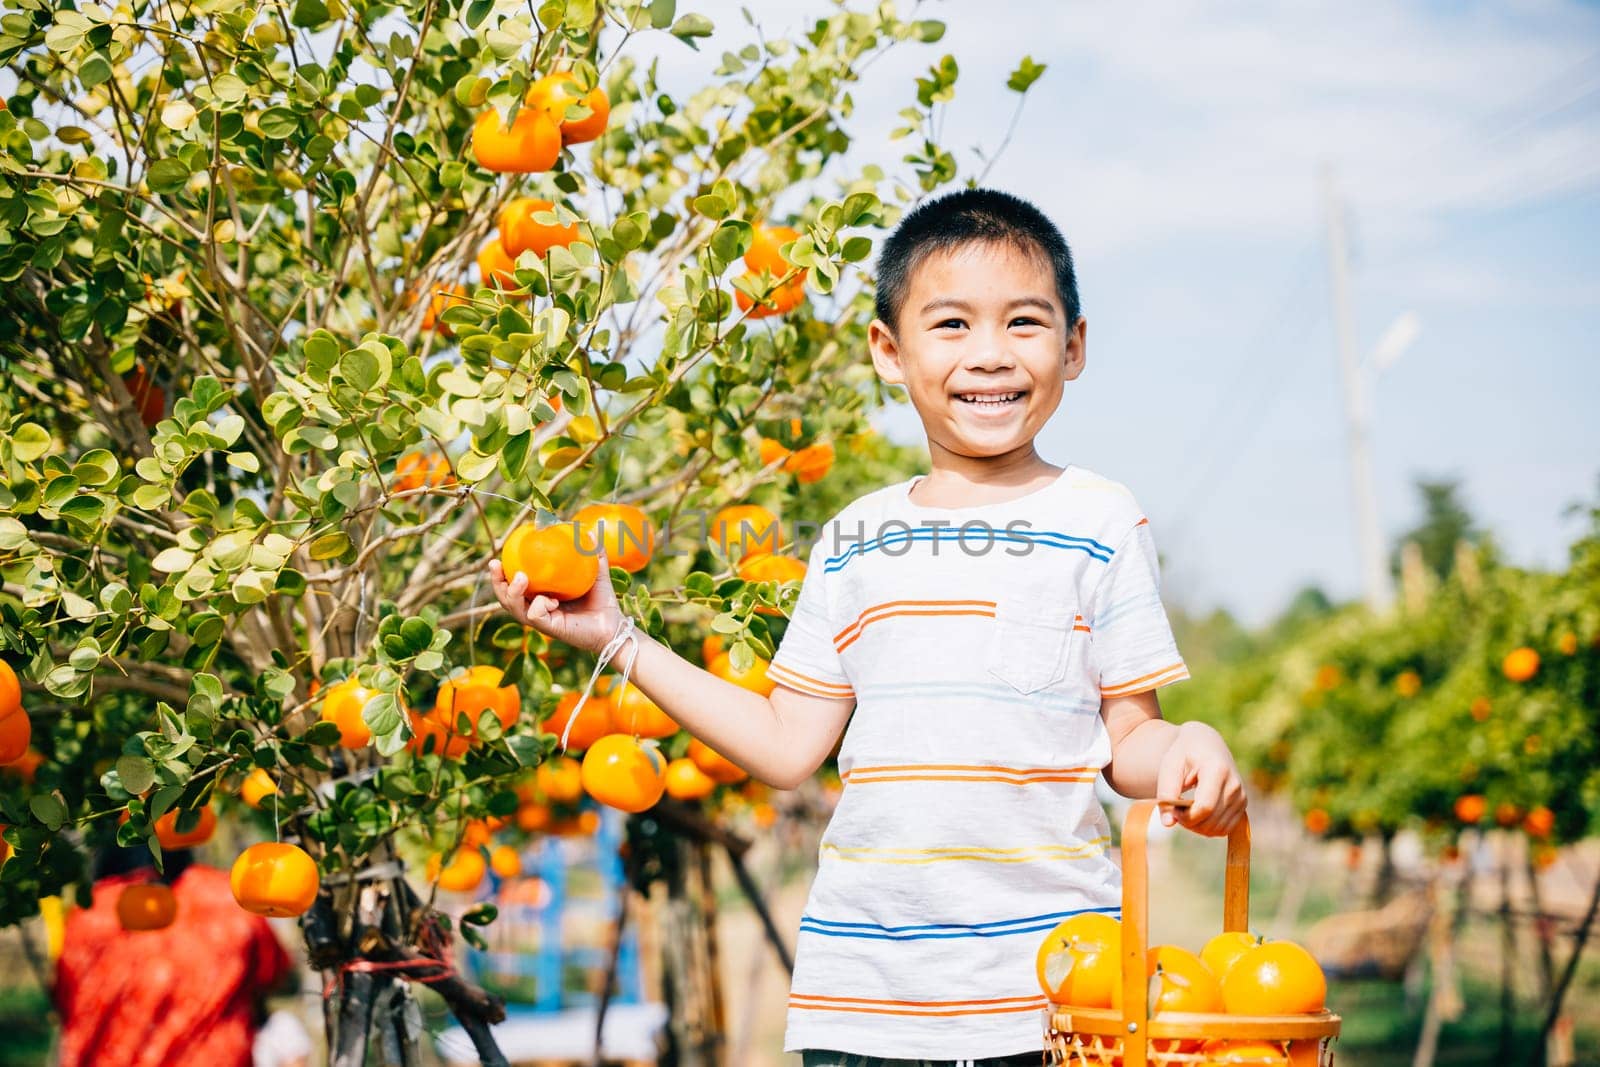 A smiling kid eagerly reaches for an orange in a lush orange tree garden by Sorapop